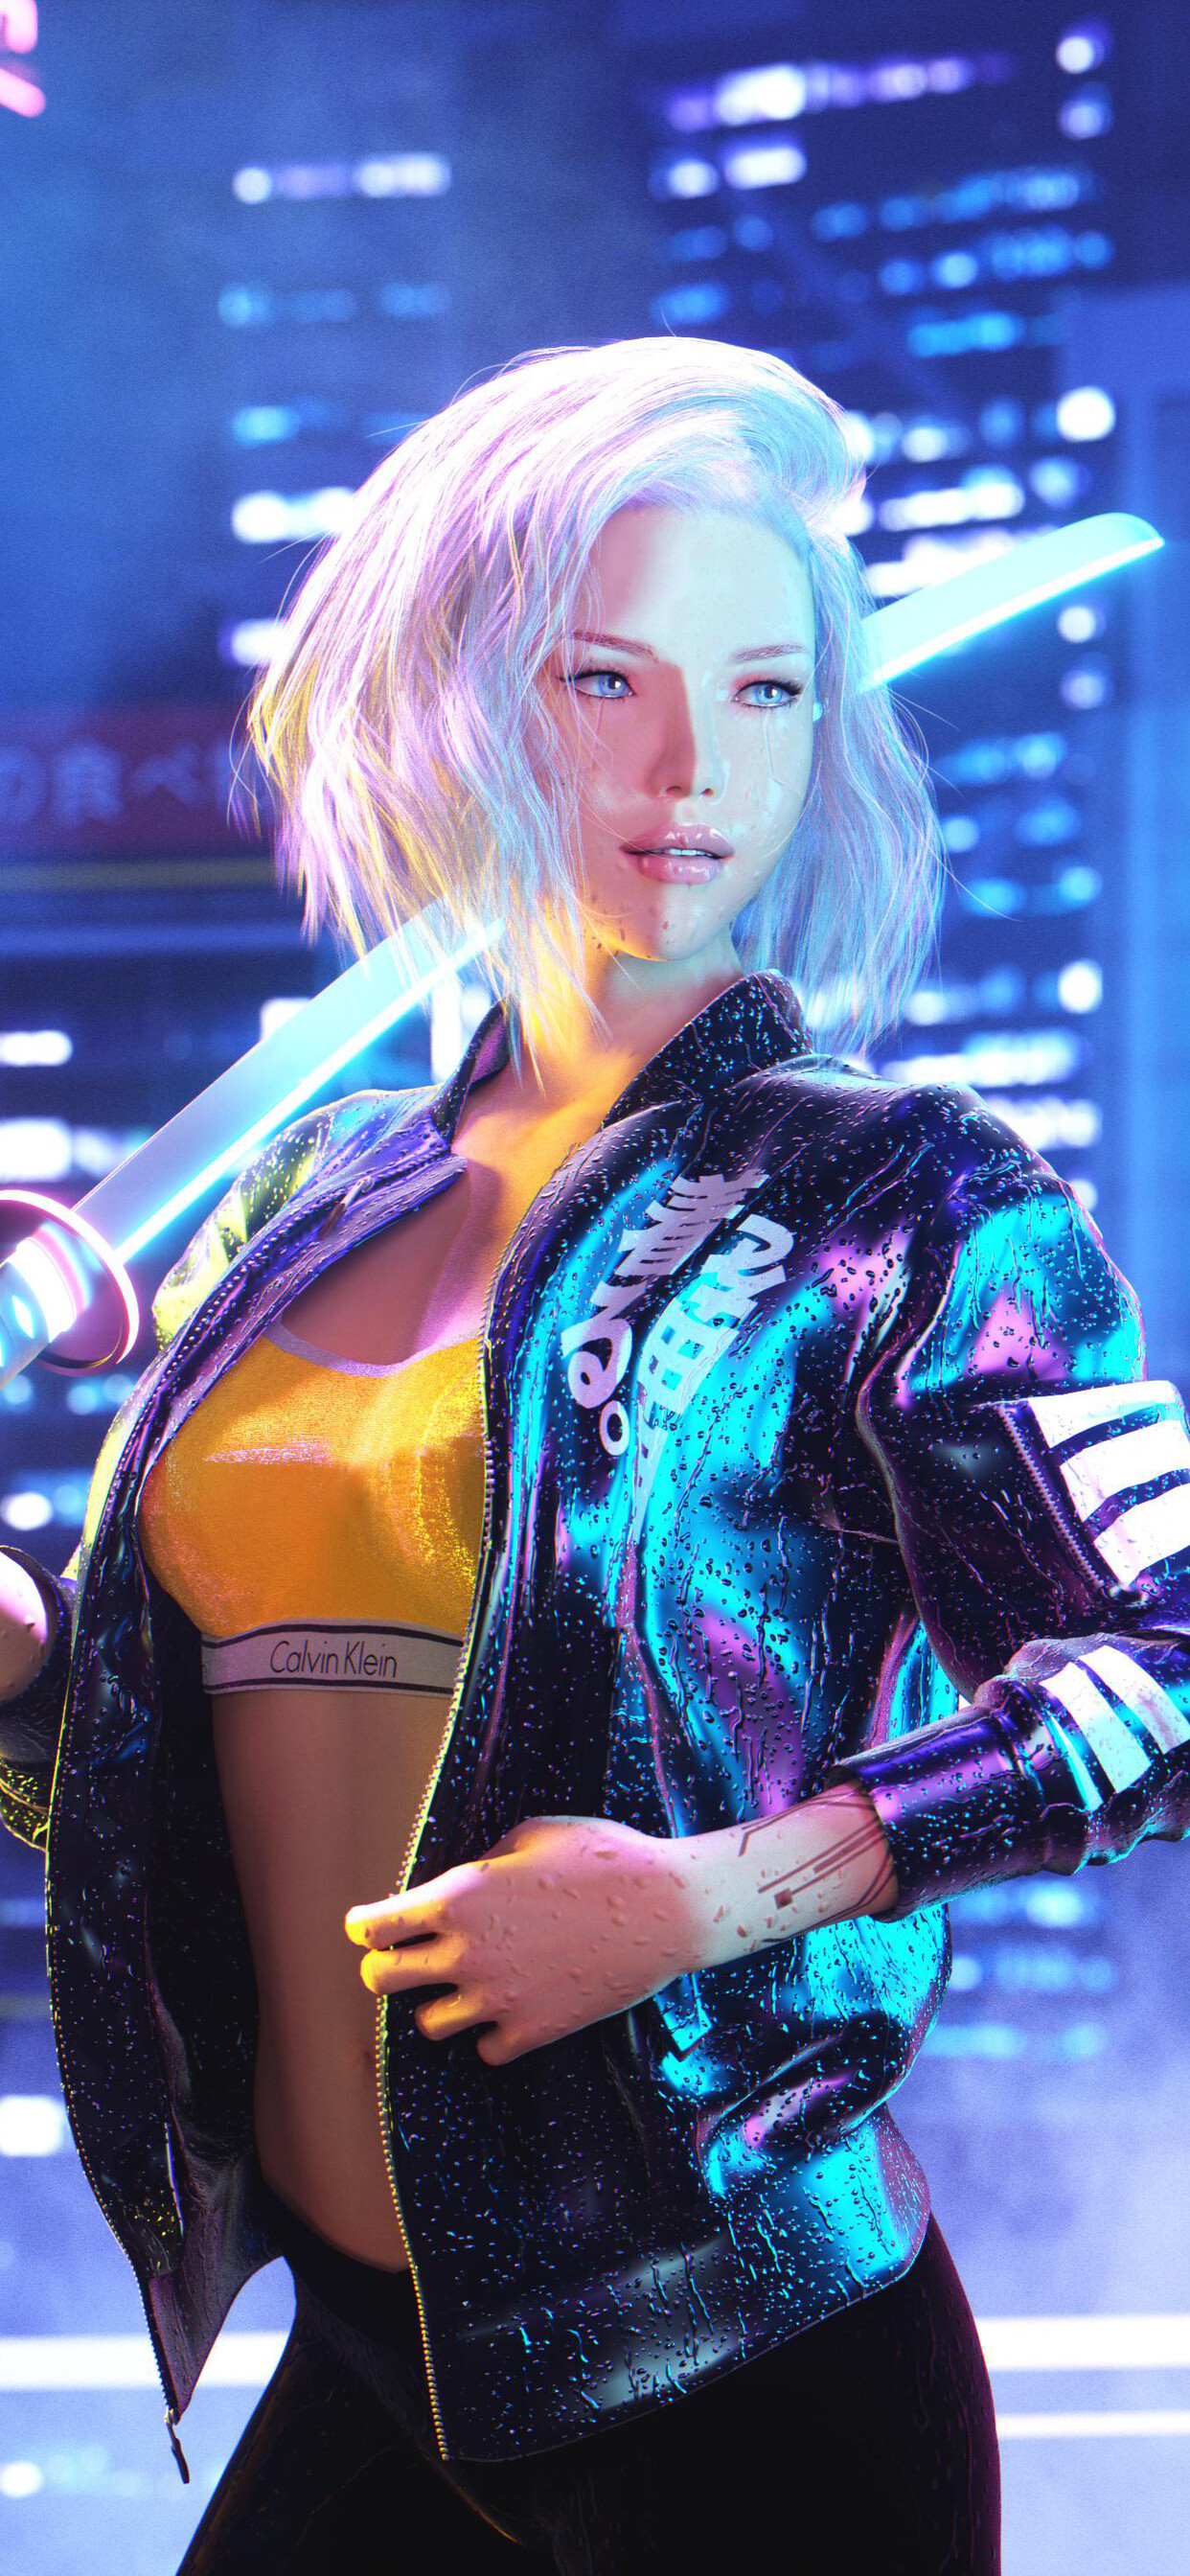 Cyberpunk 2077: Players can explore futuristic locations, interact with citizens, perform missions, and engage in combat to complete various objectives within a storyline. 1250x2690 HD Wallpaper.